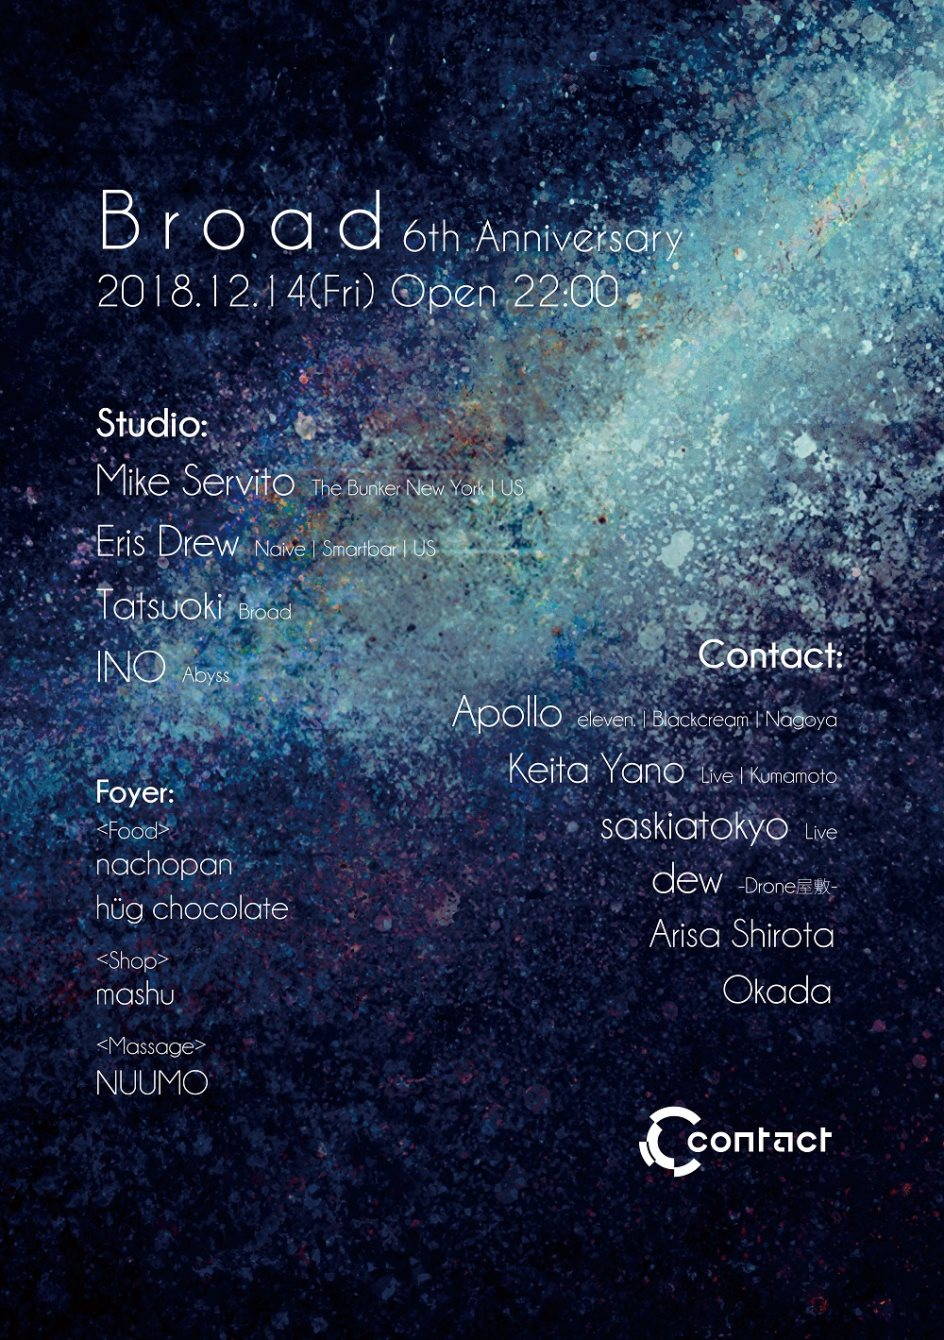 Broad 6th Anniversary Feat. Mike Servito and Eris Drew - Flyer front